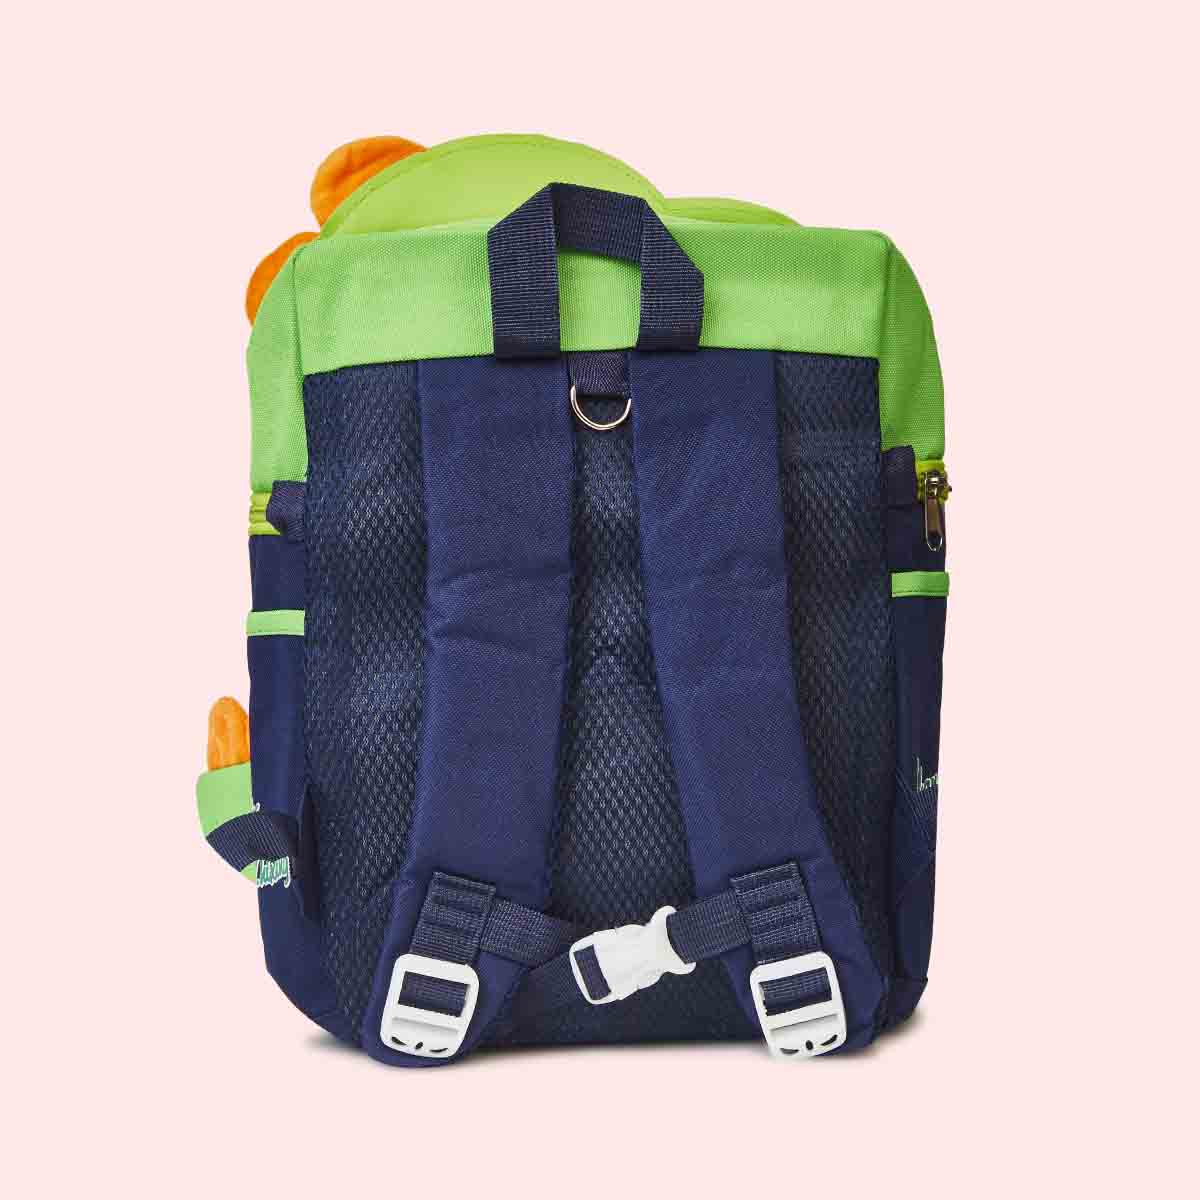 Compact Activity Bag with 2 Mini Hanging Pouches - Dino